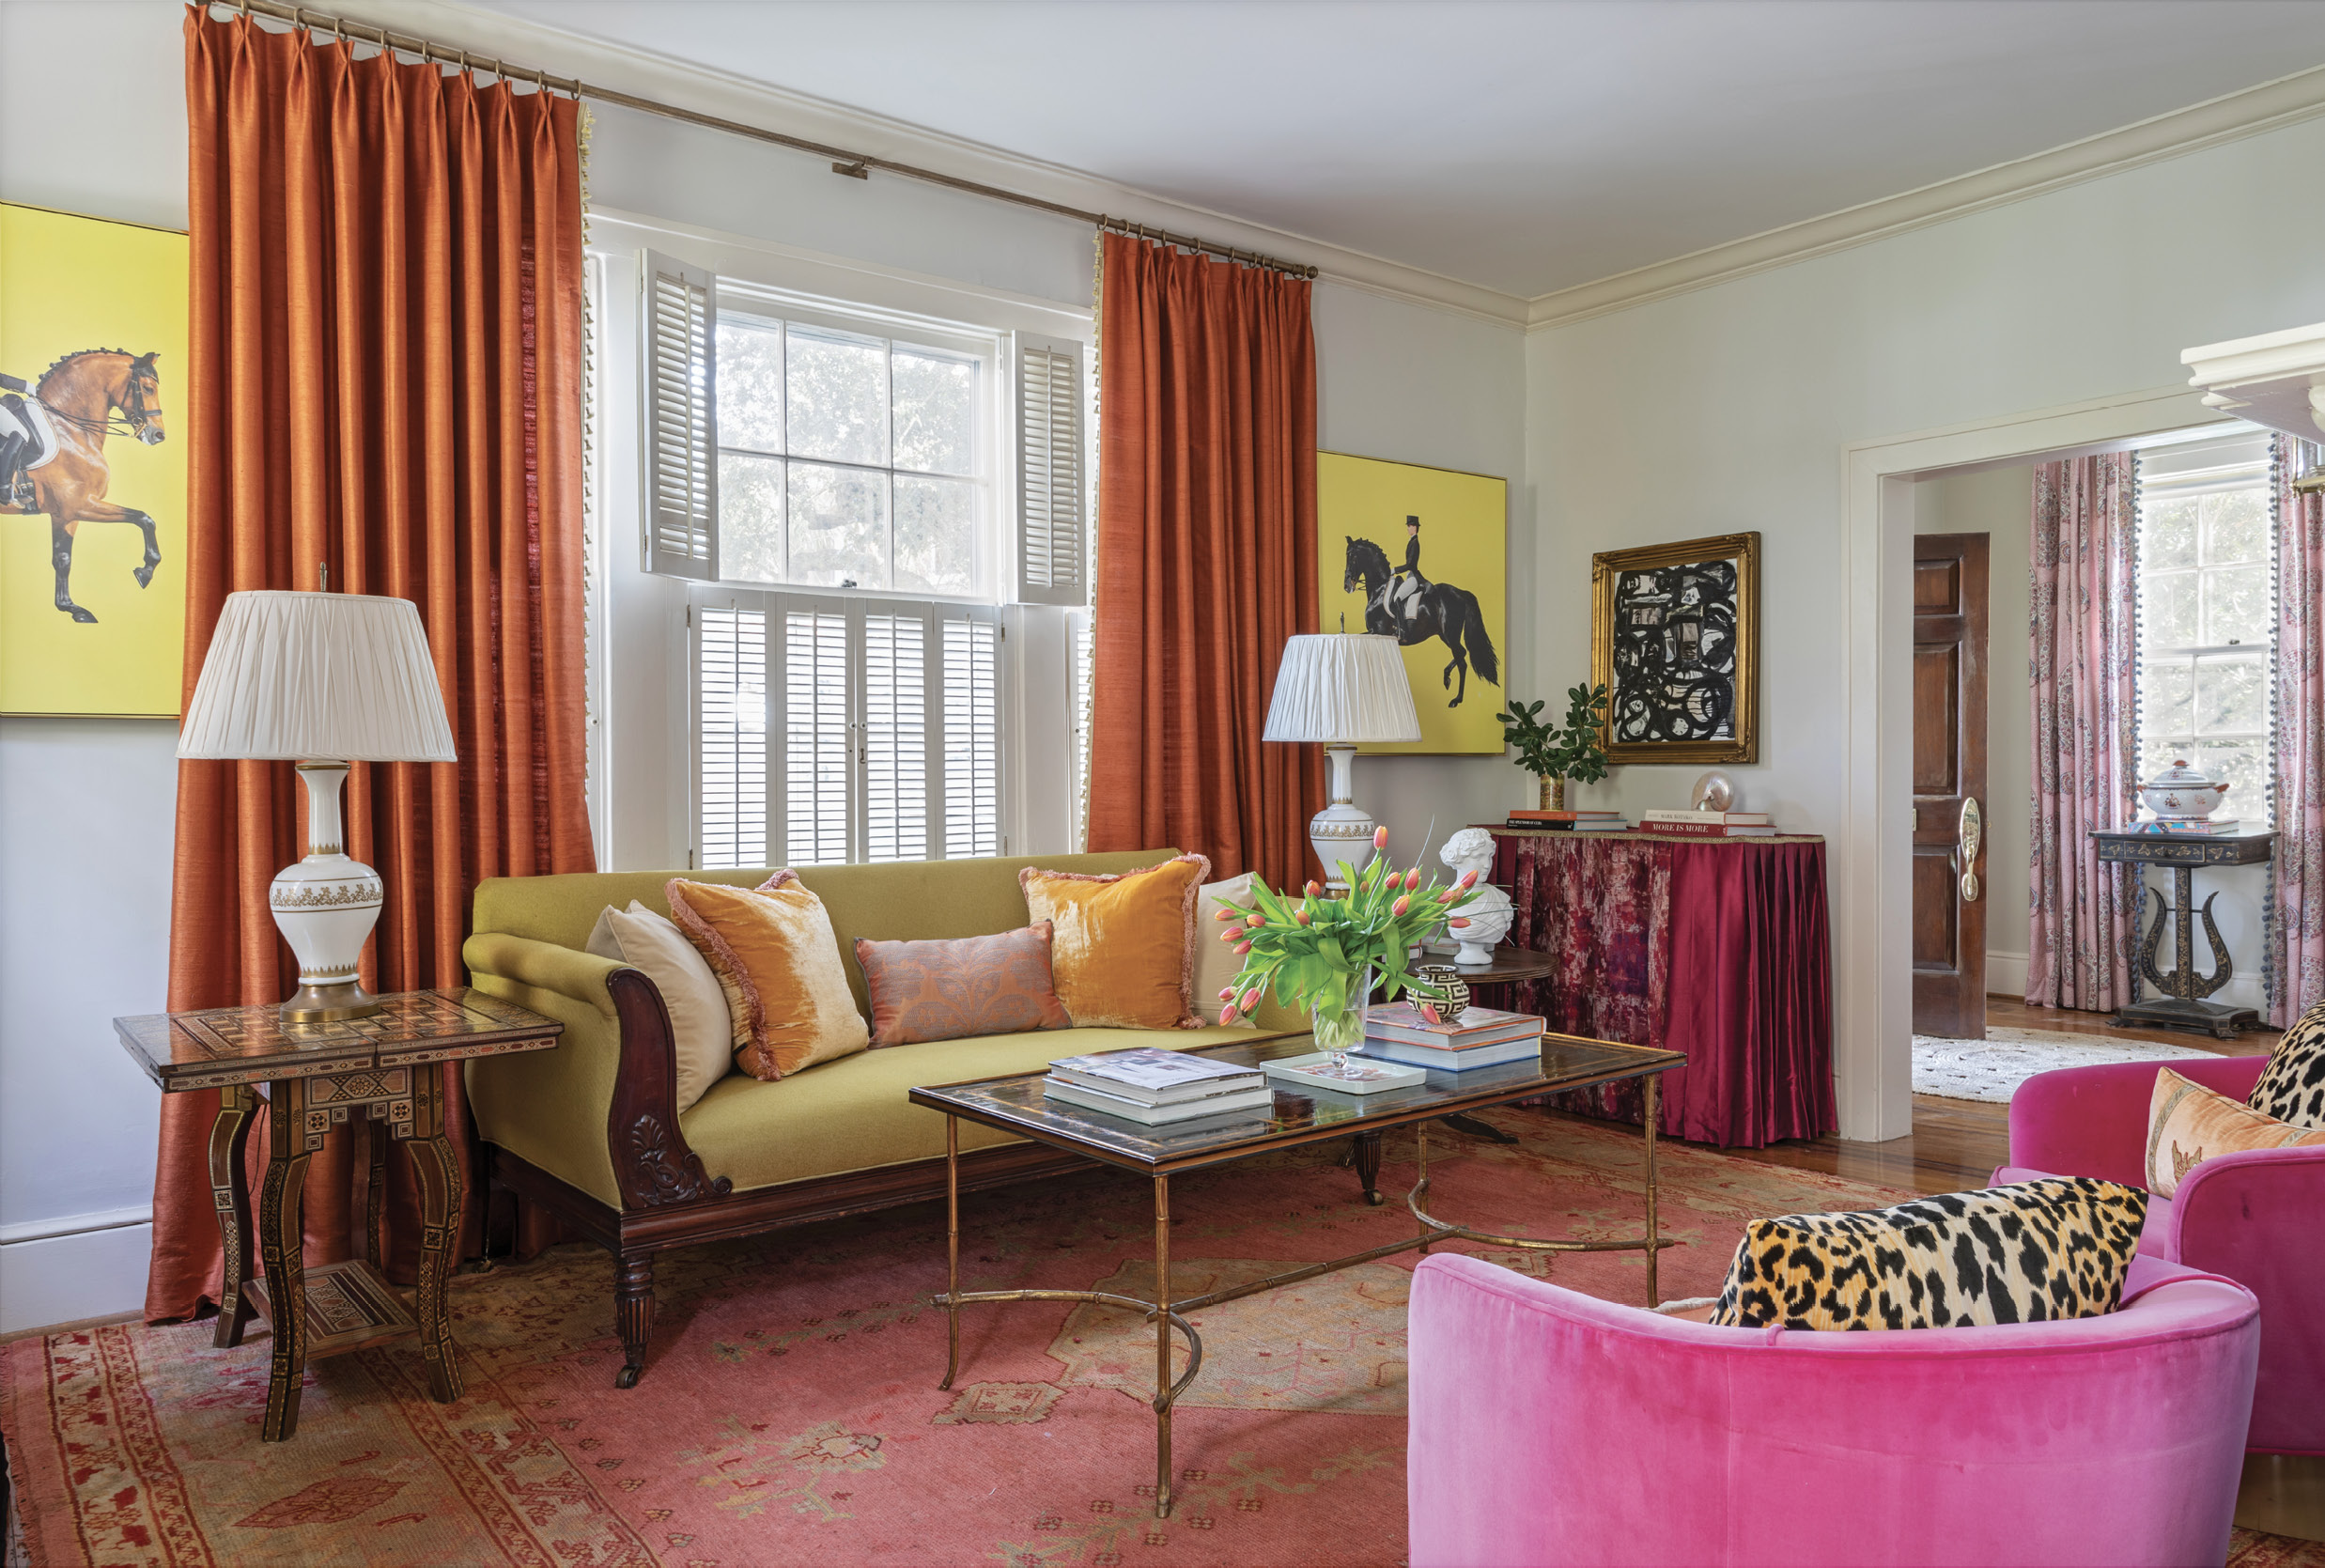 TechniColor Dreams: The sumptuous living room sets the tone for the house. North facing, it can be dark, so Ralph mixed shades of pinks, oranges, and a splash of chartreuse to give it a bright, energetic feel. Brilliant yellow equestrian art by Scout Design Studio and a velvet table skirt pop against the walls painted in Benjamin Moore’s “Pale Oak,” and a vintage coffee table complements the antique sofa upholstered in a woven Sabina Fay Braxton fabric.